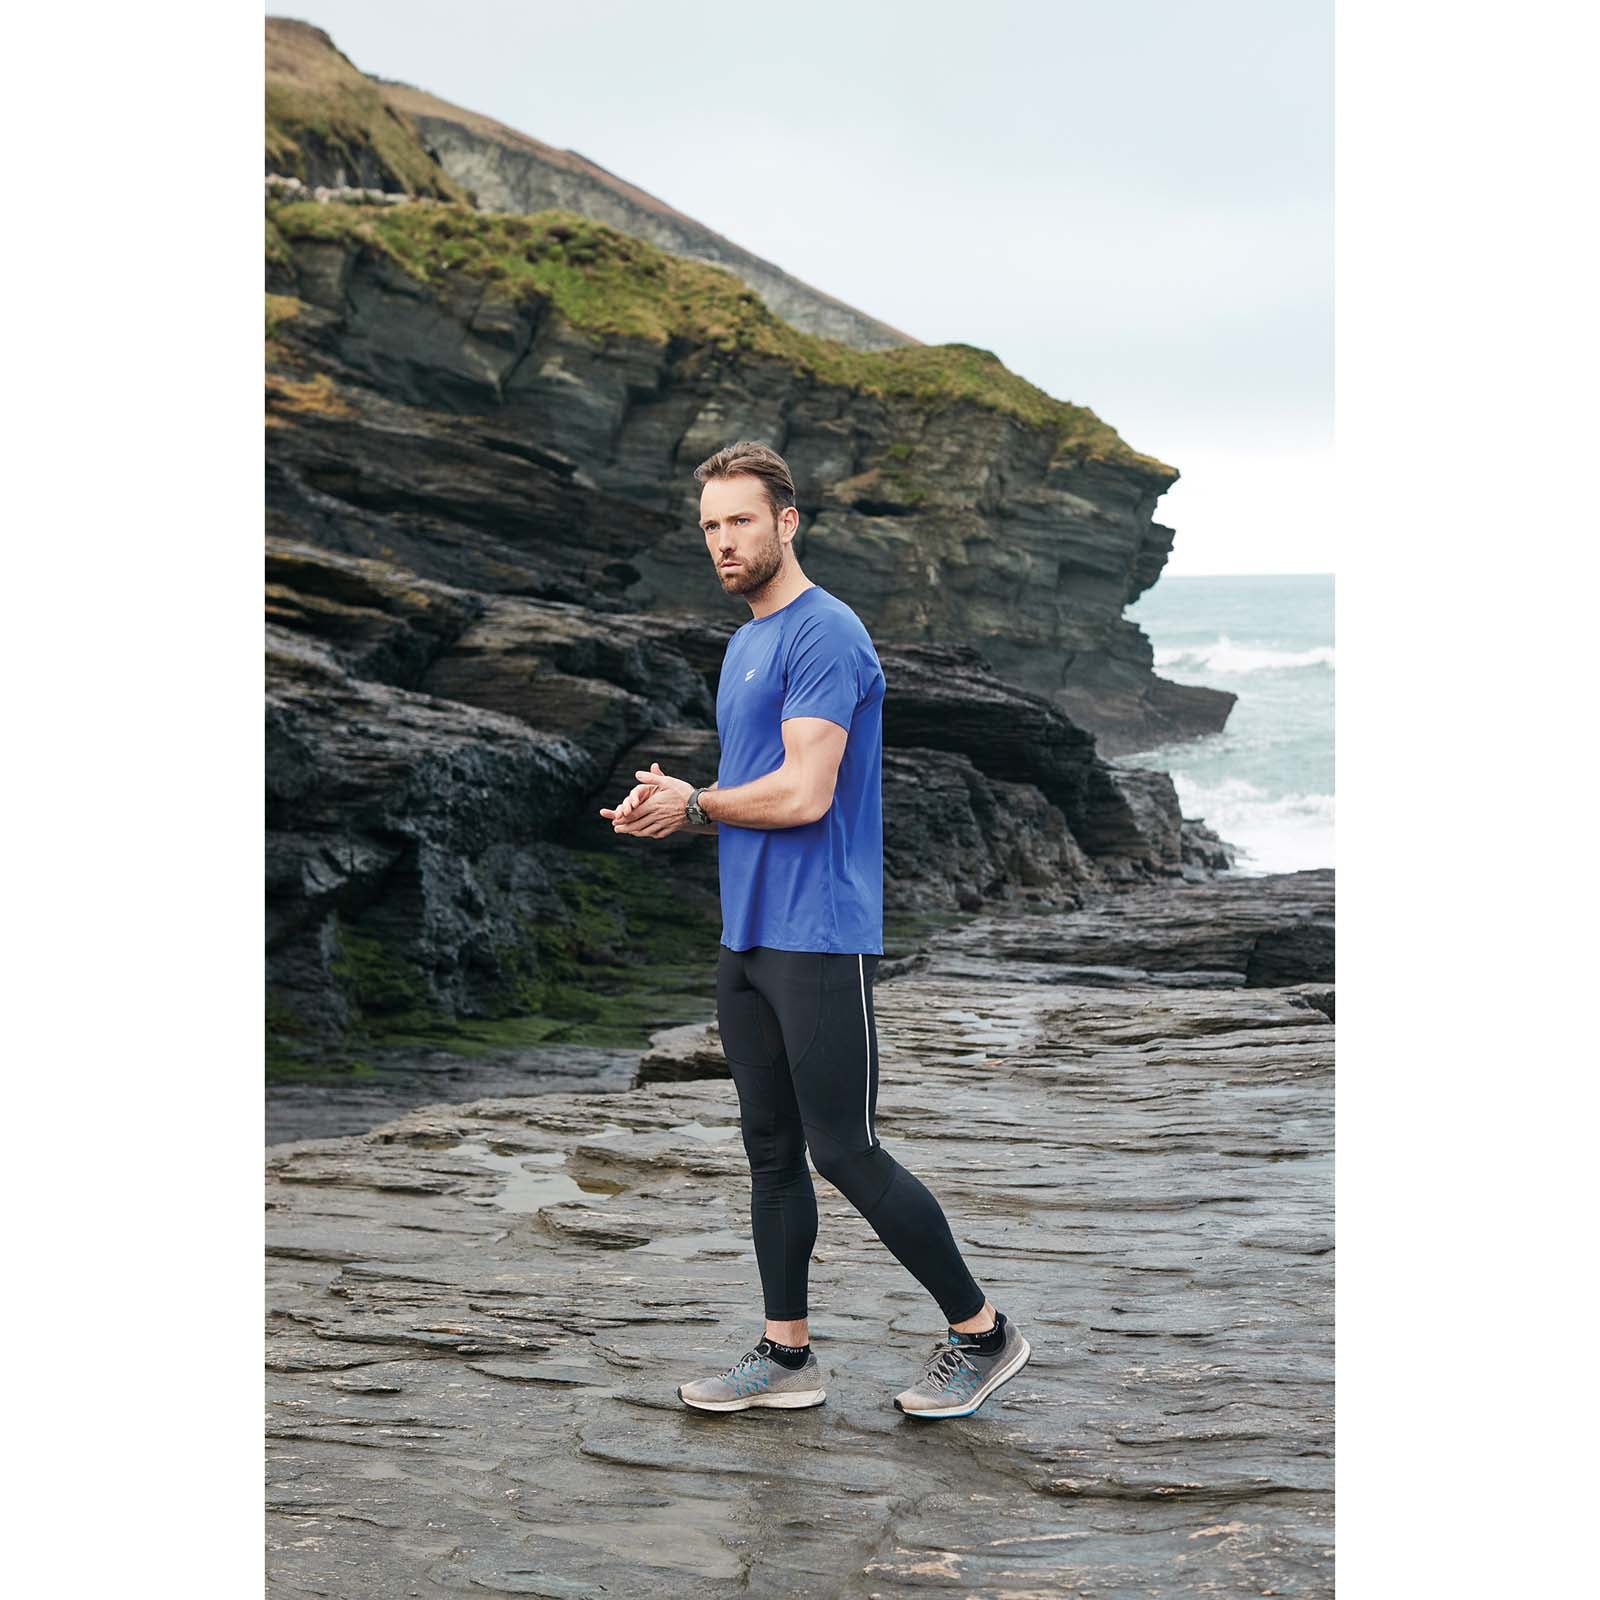 Men's Running Leggings Men in Tights  Recycled and recyclable – Circle  Sportswear